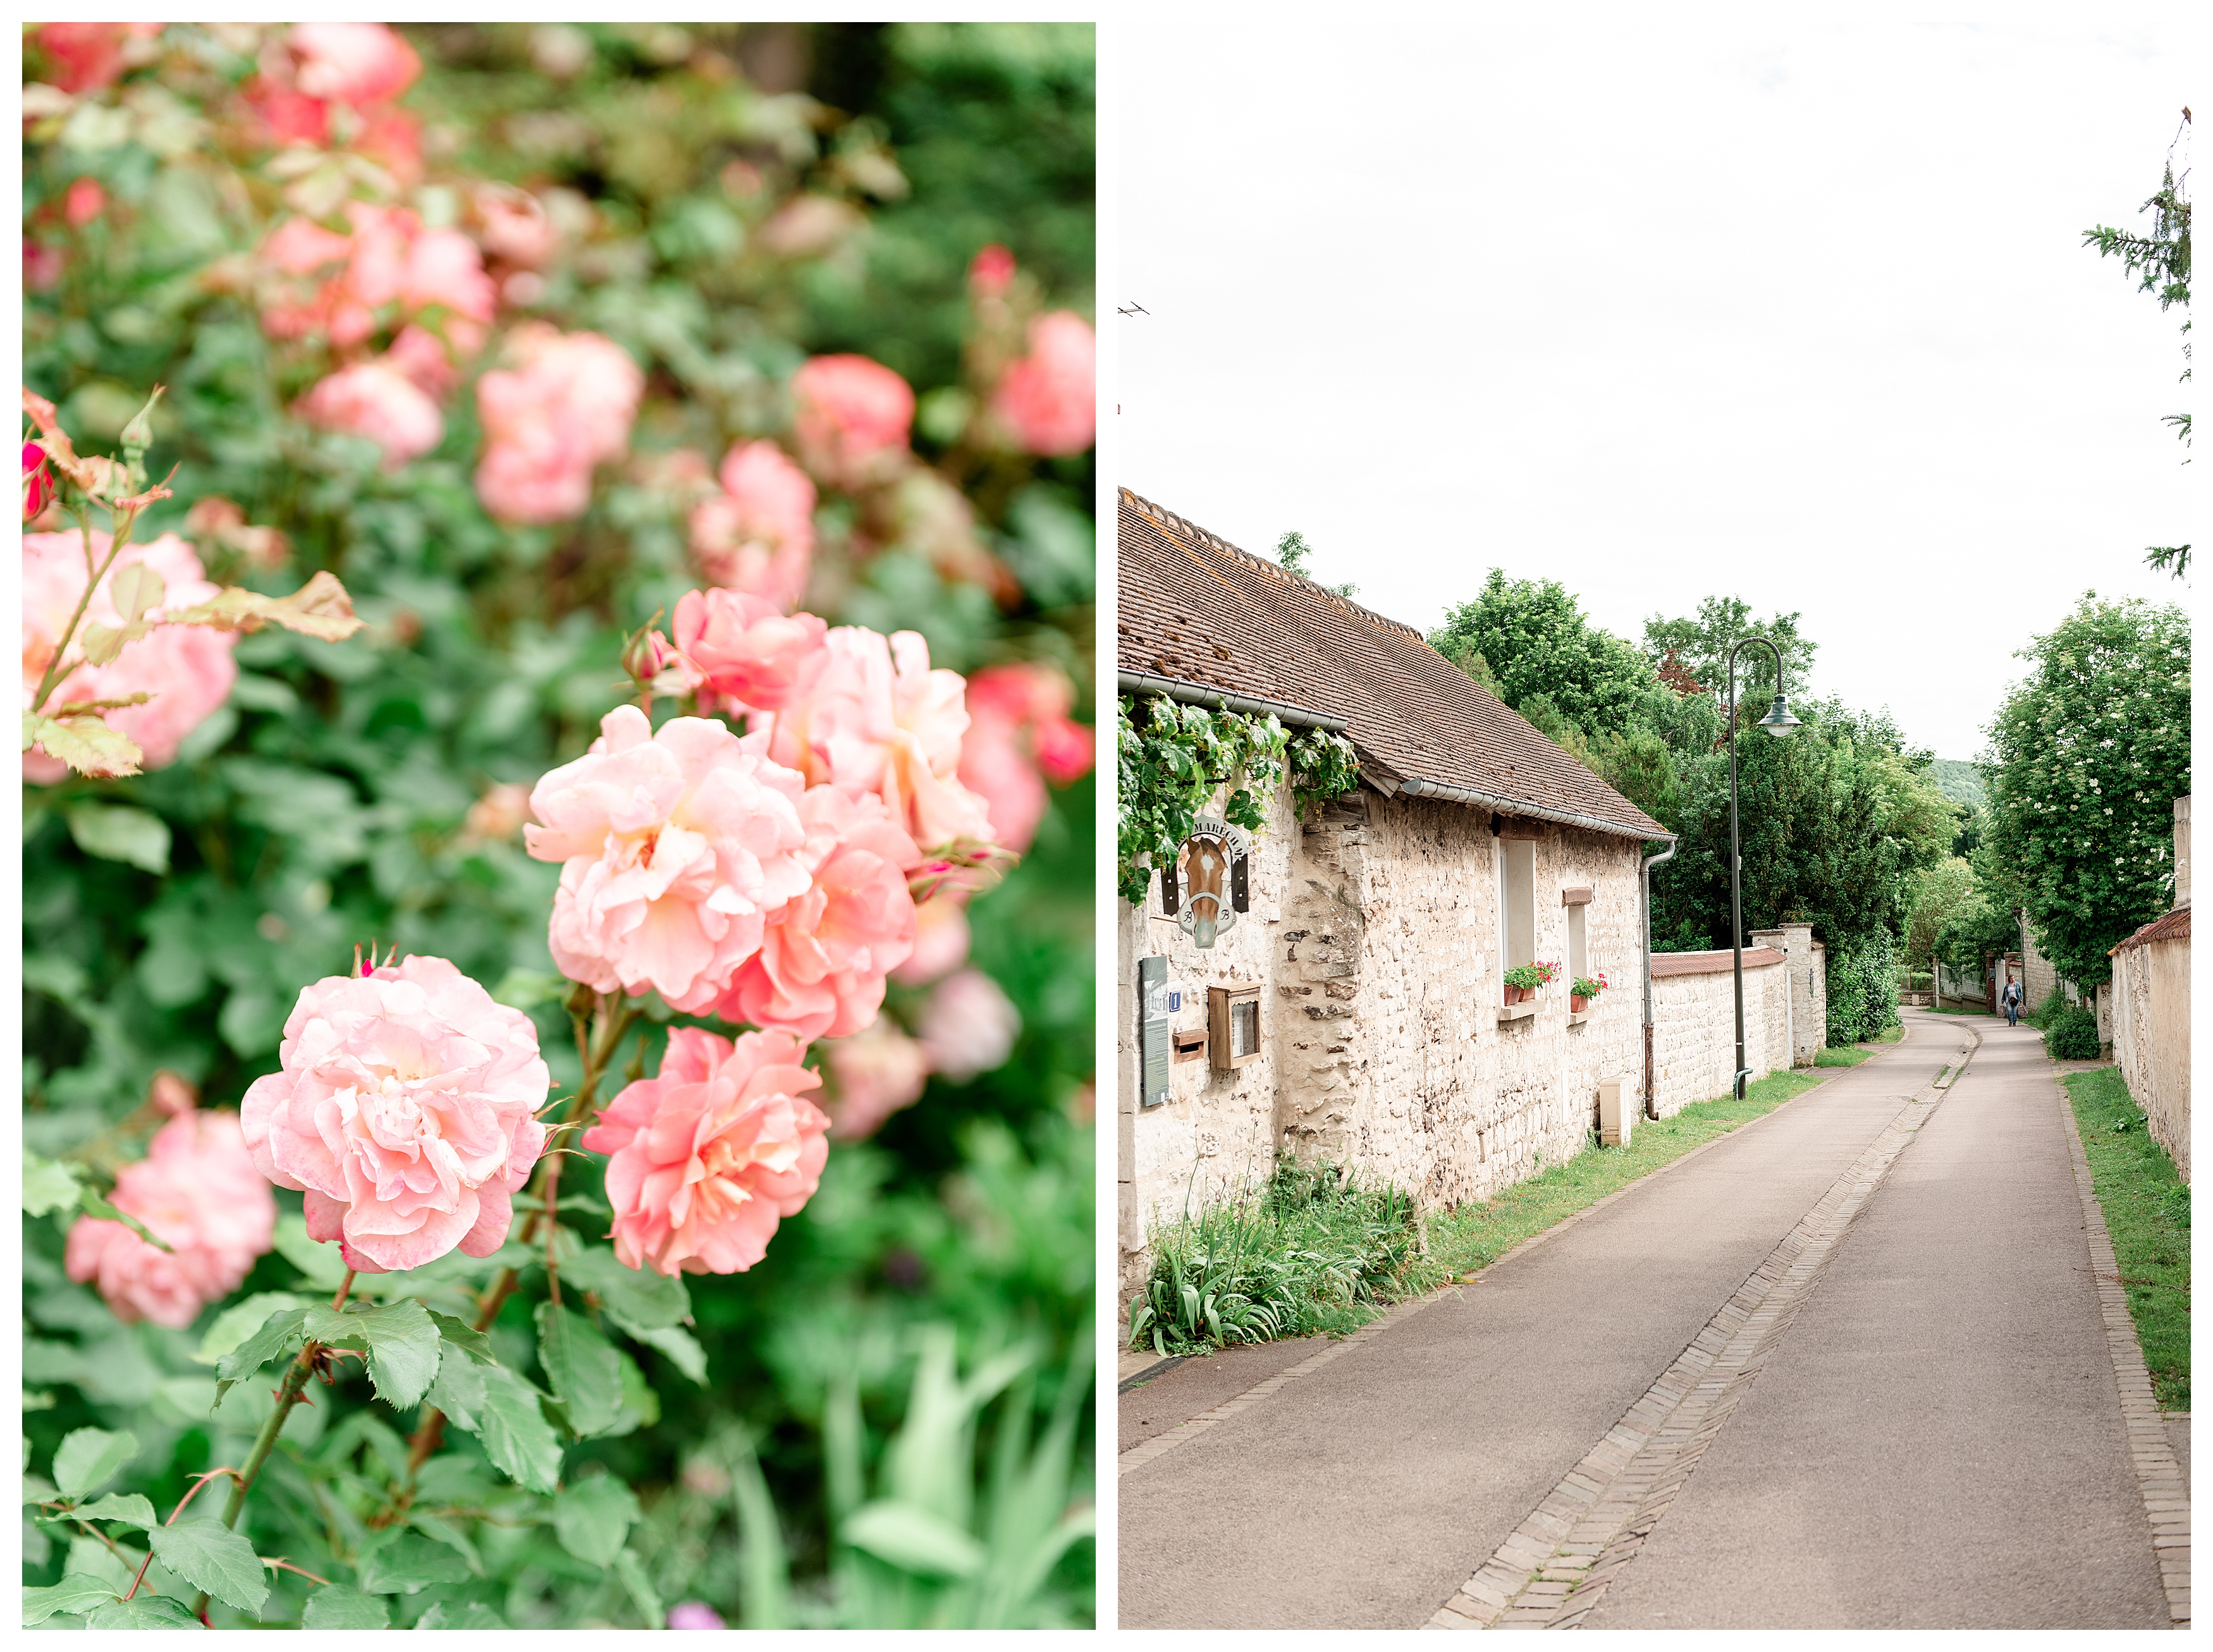 roses in monet's garden and a quite street in giverny